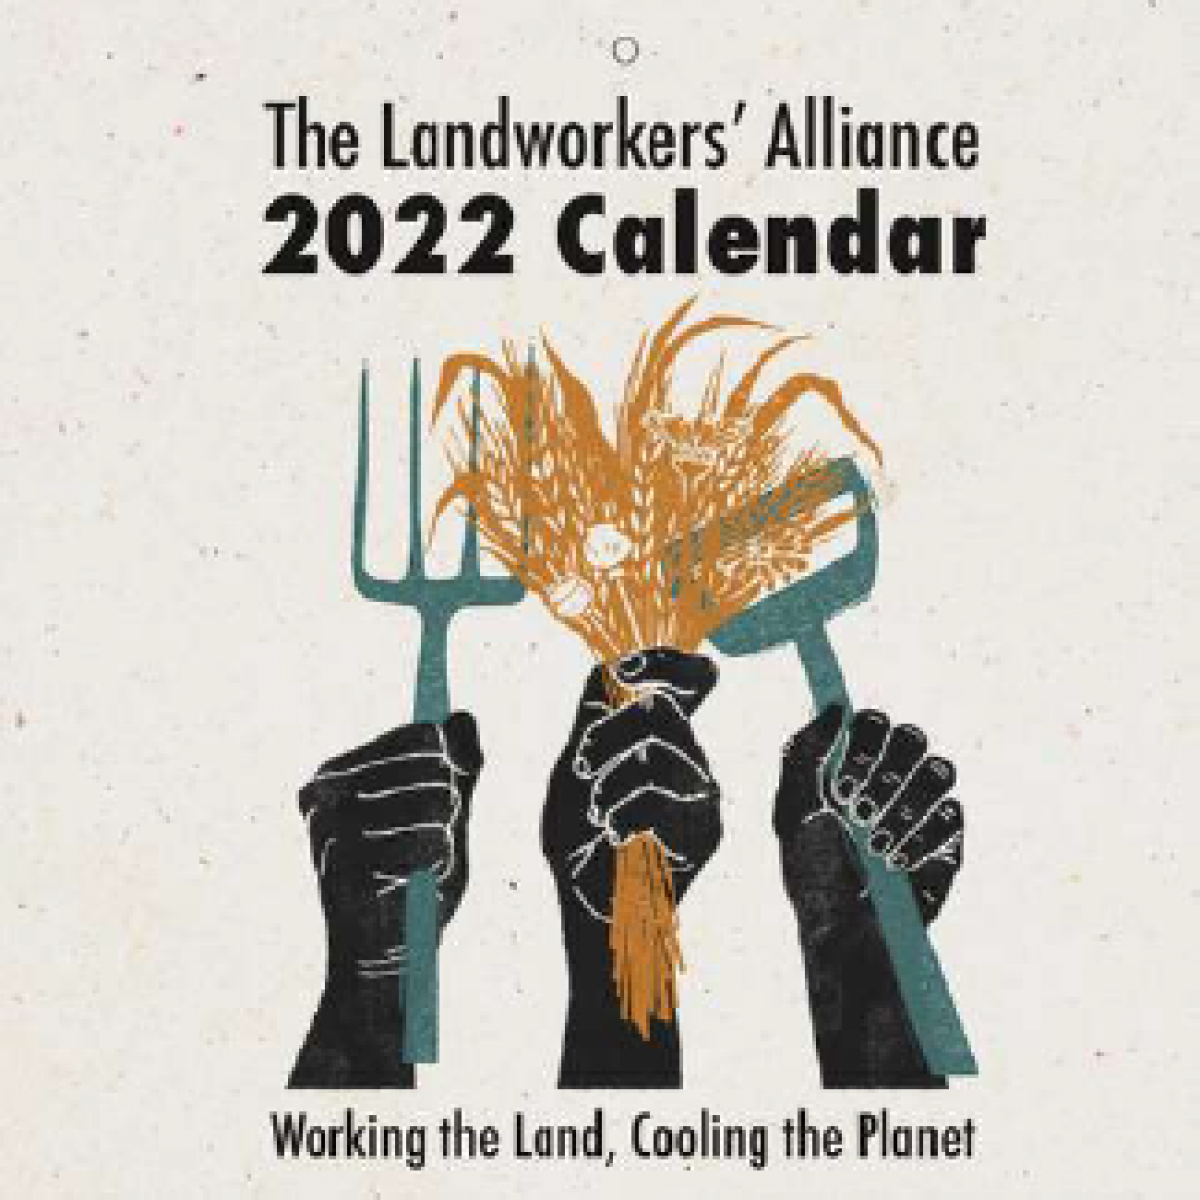 Product picture for The Landworkers Alliance 2022 Calendar: Working the Land, Cooling the Planet